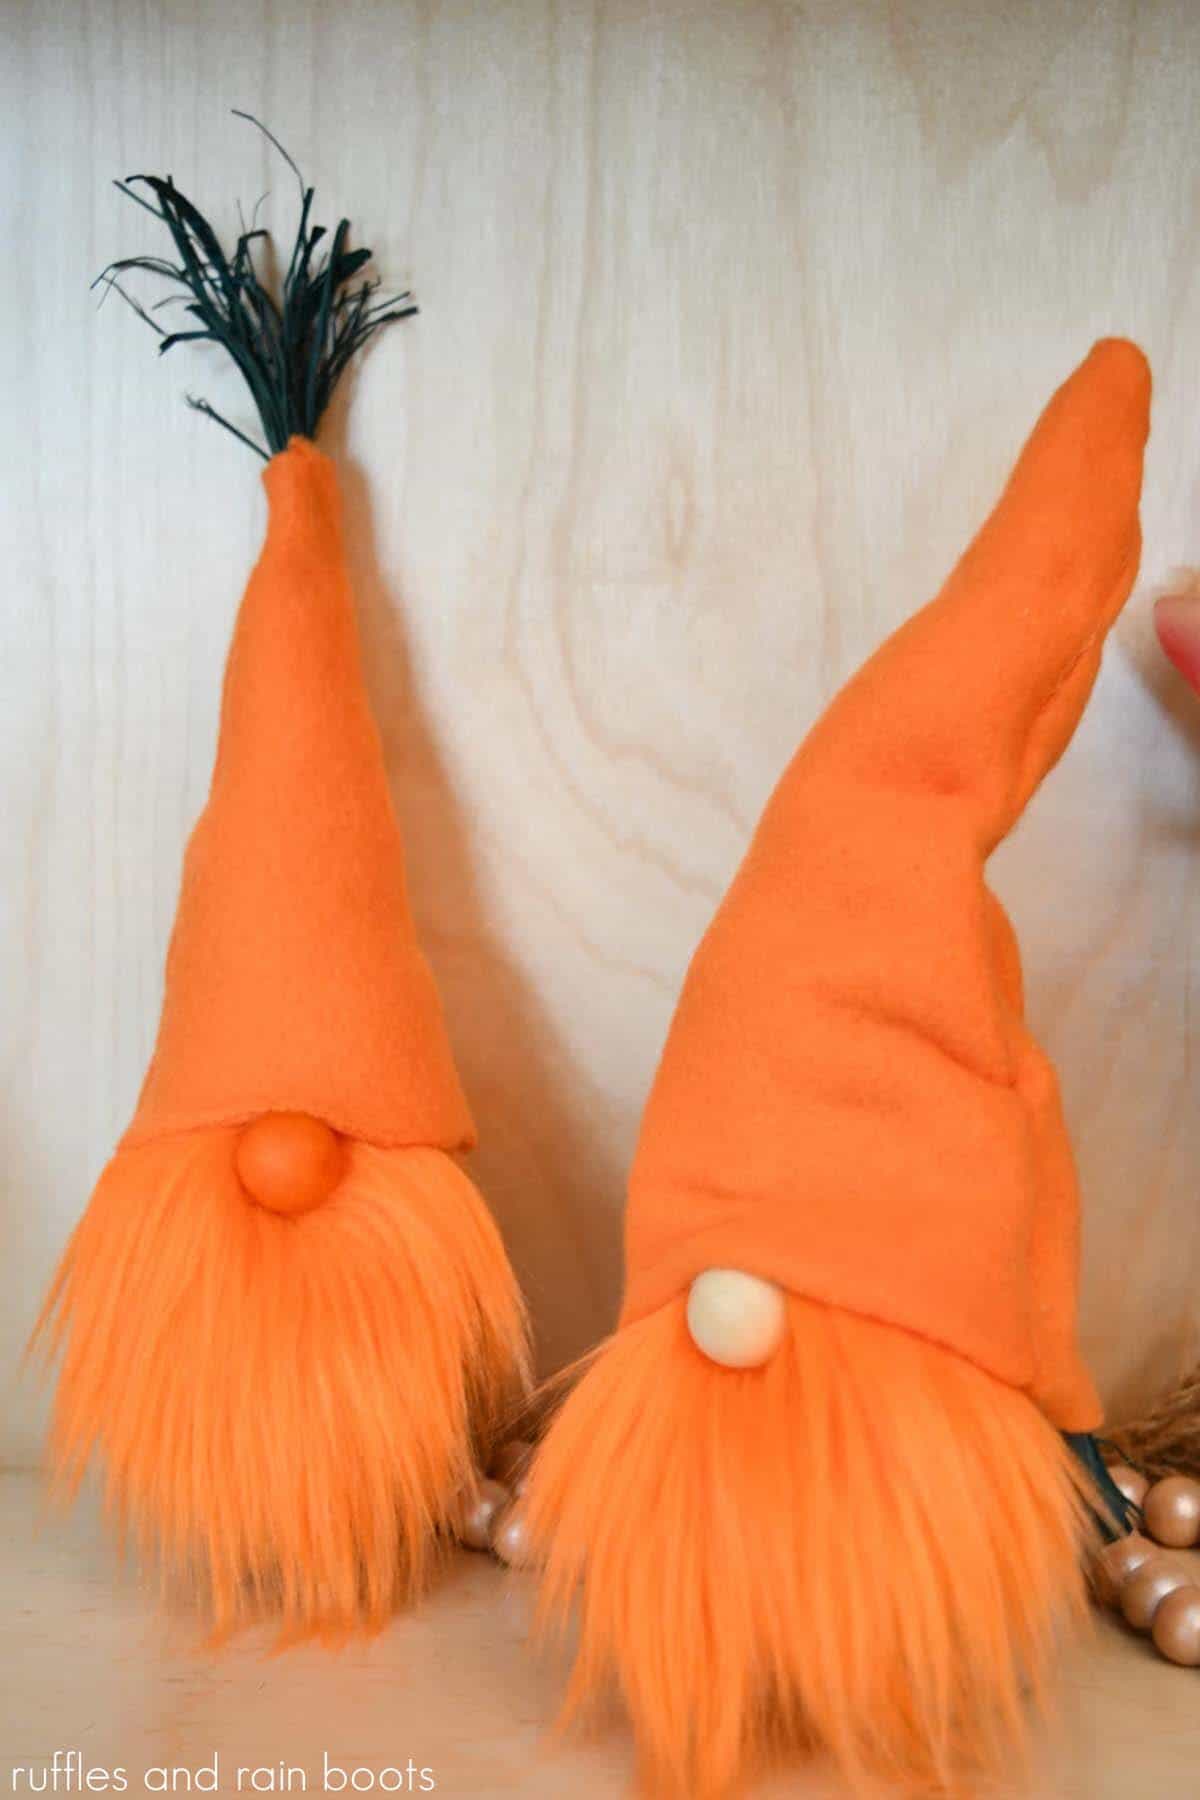 Vertical image showing two carrot gnomes for Easter with orange hats, green raffia, orange gnome beards from fur and a light wood background.